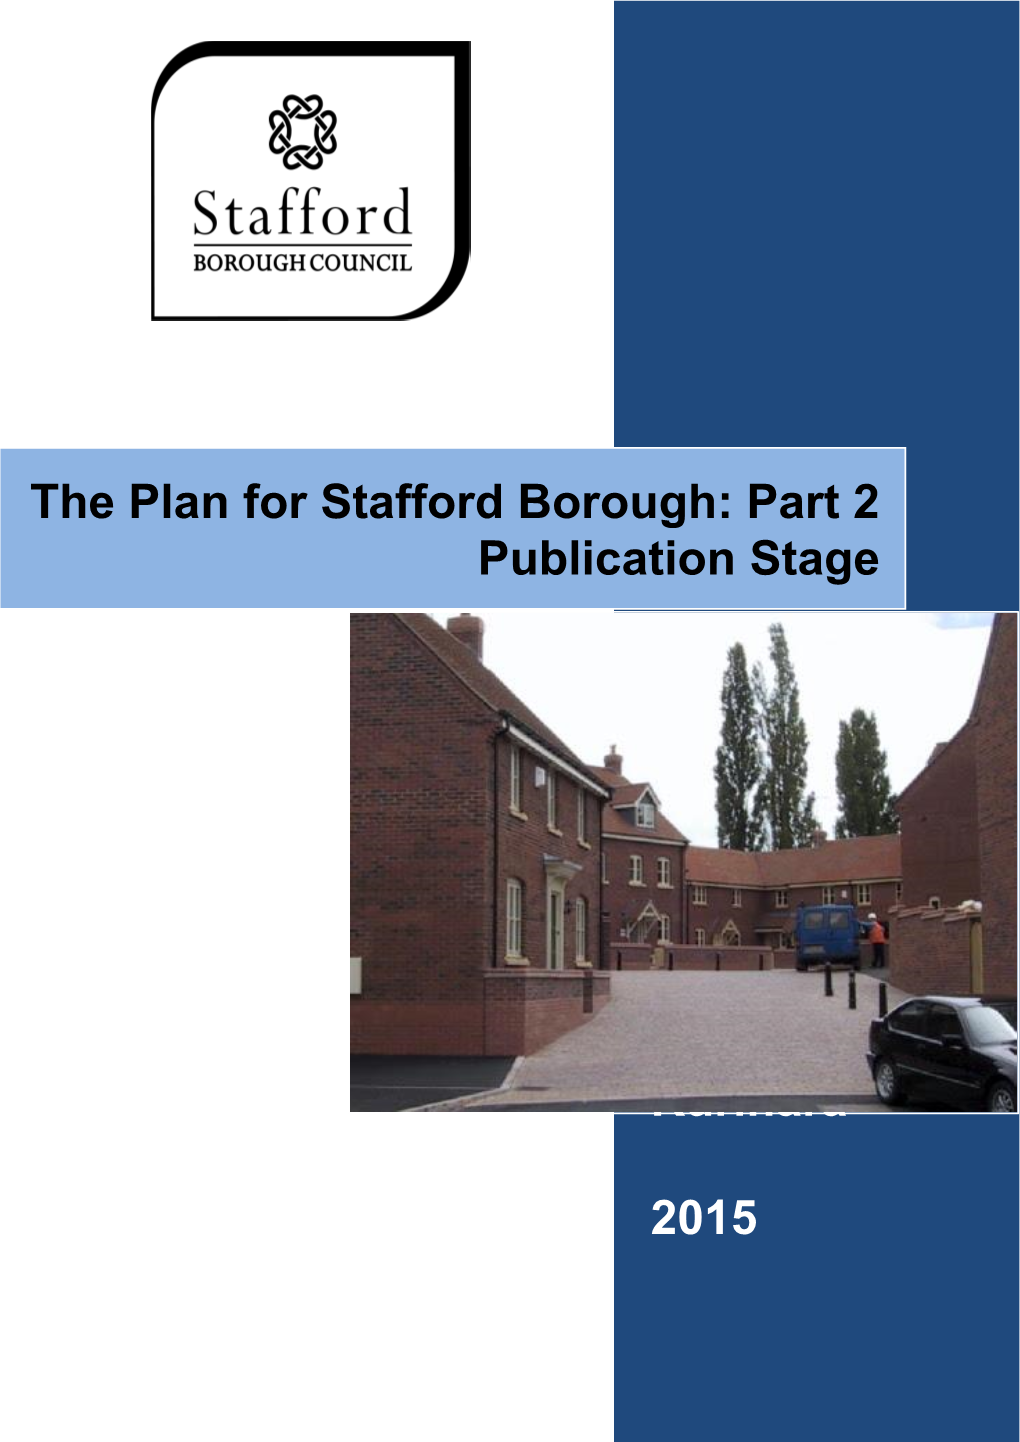 The Plan for Stafford Borough Part 2 Publication